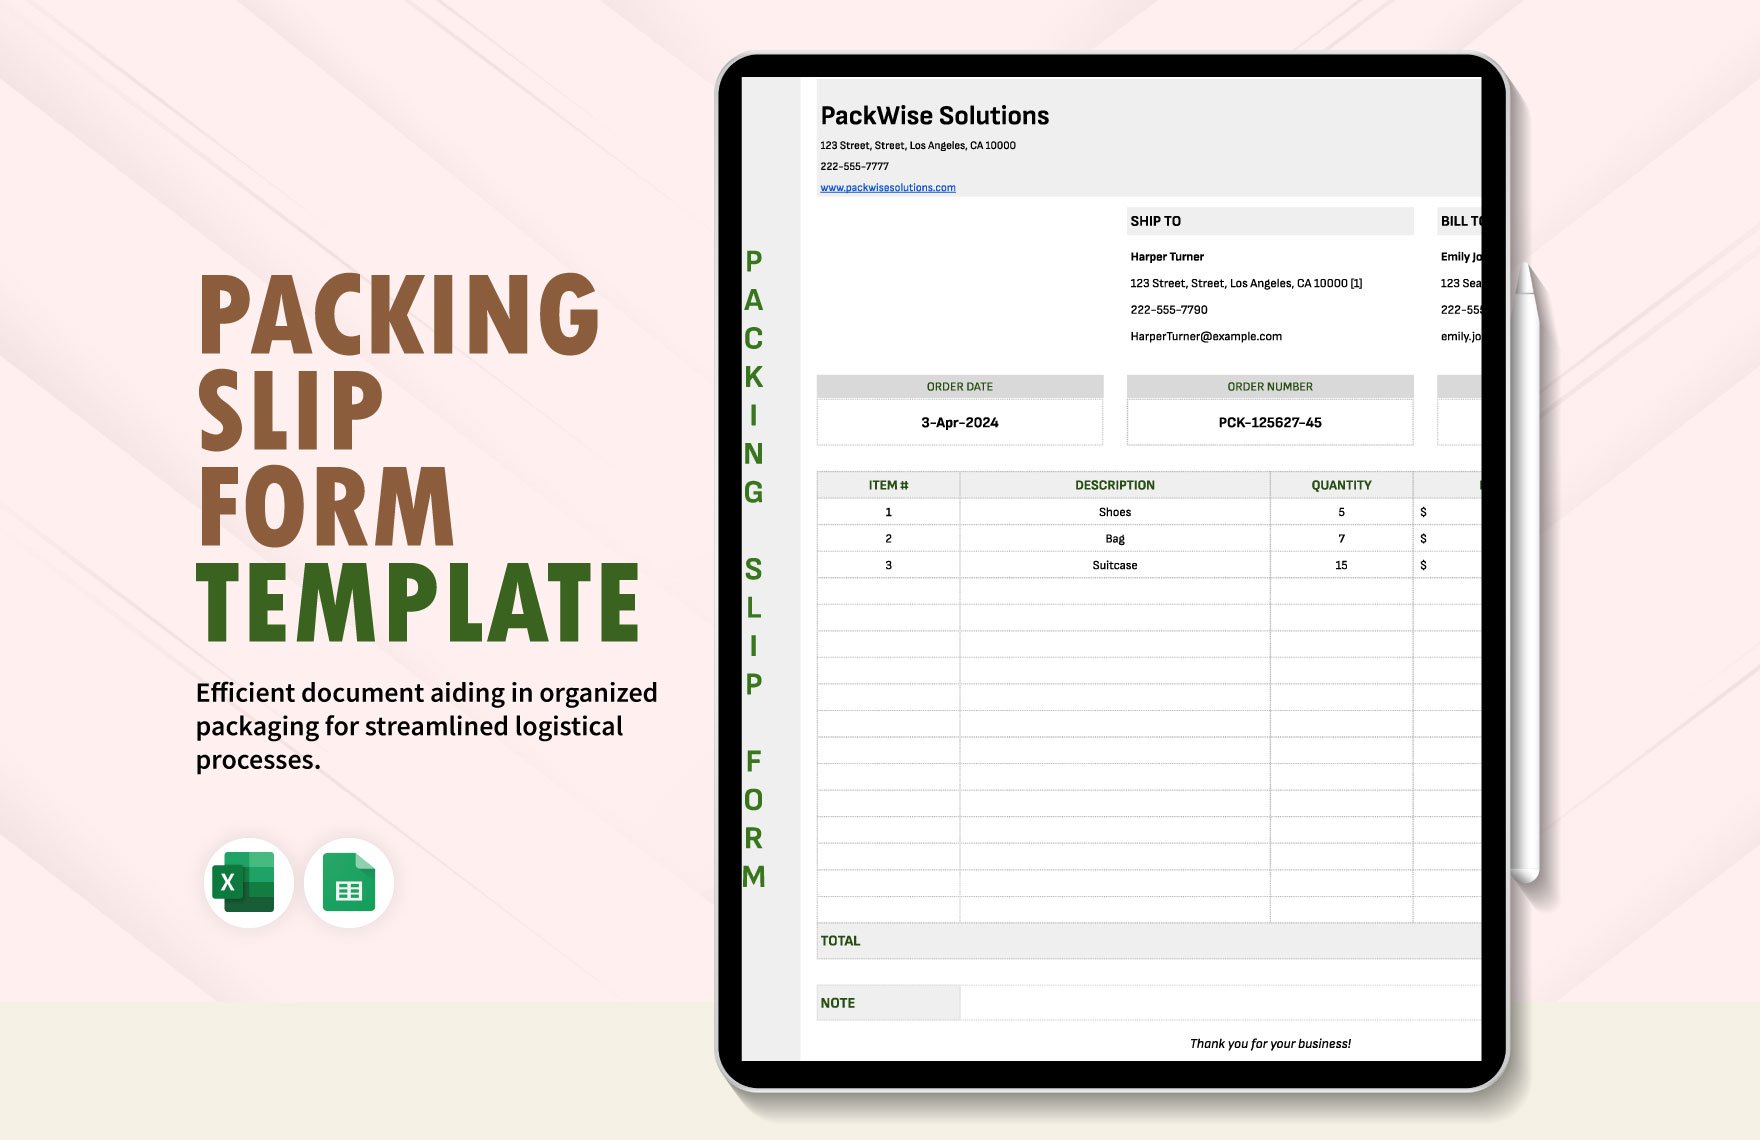 Packing Slip Form Template